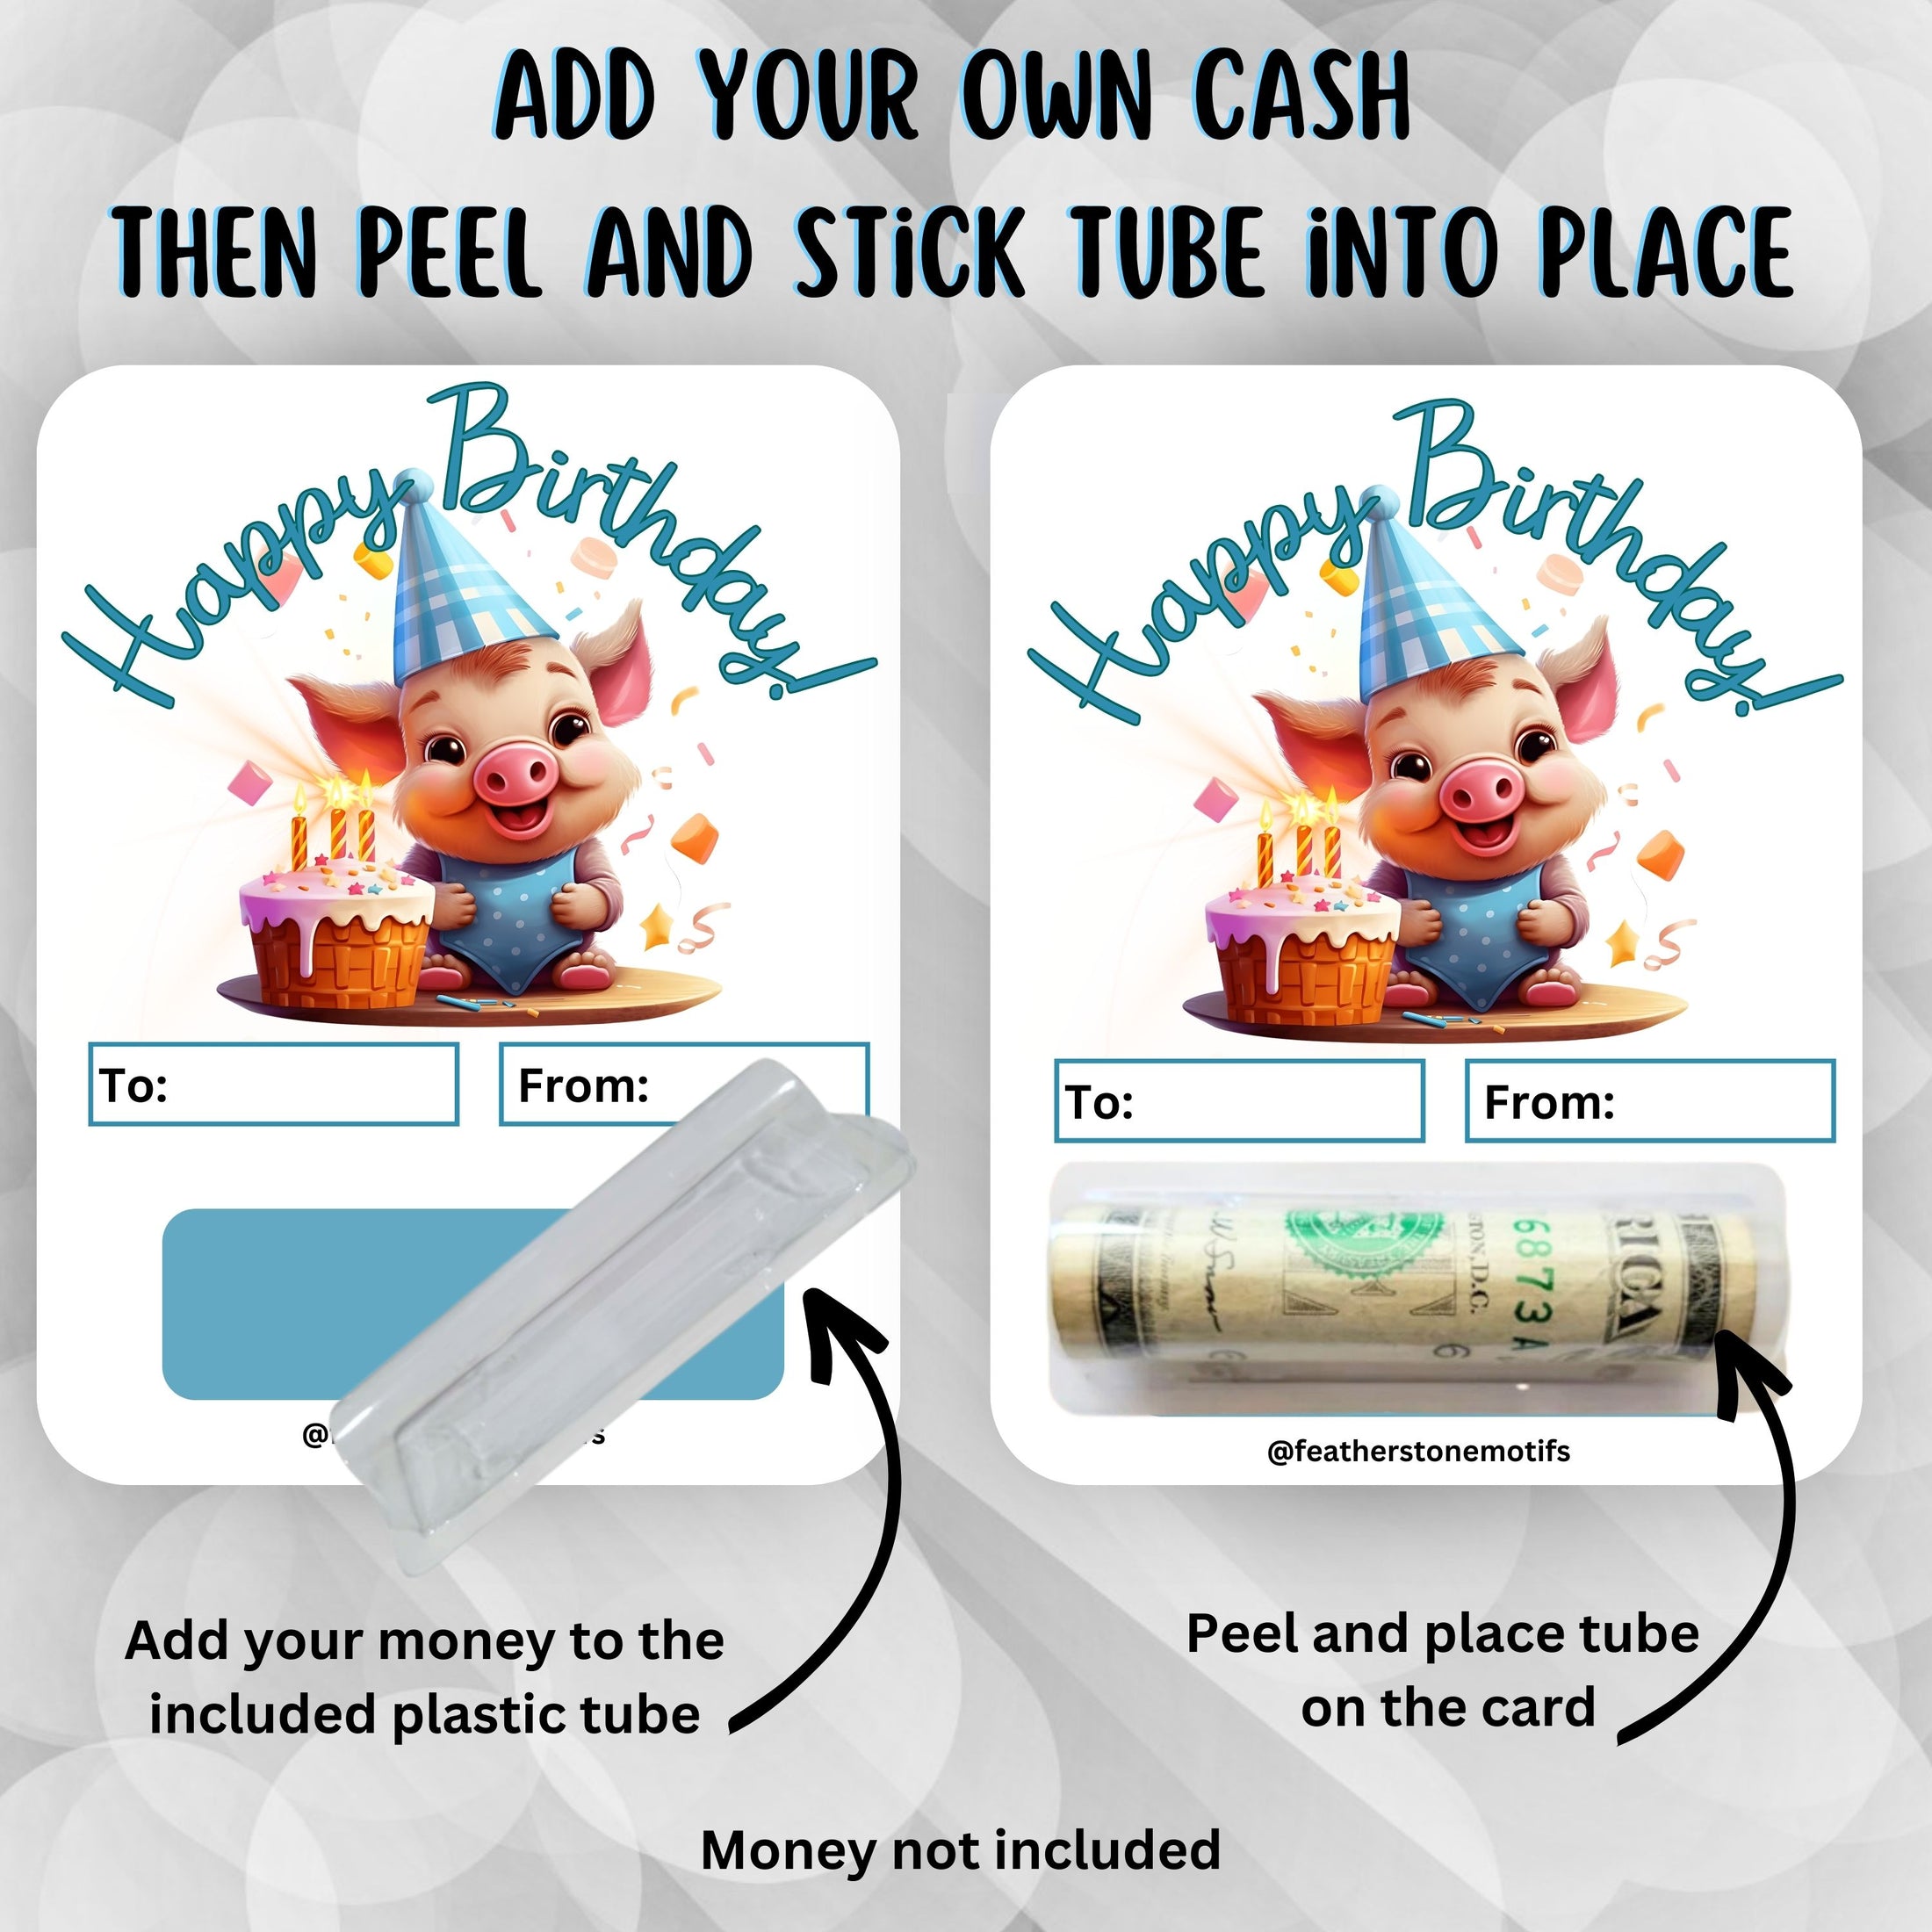 This image shows how to attach the money tube to the Piggy Birthday money card.